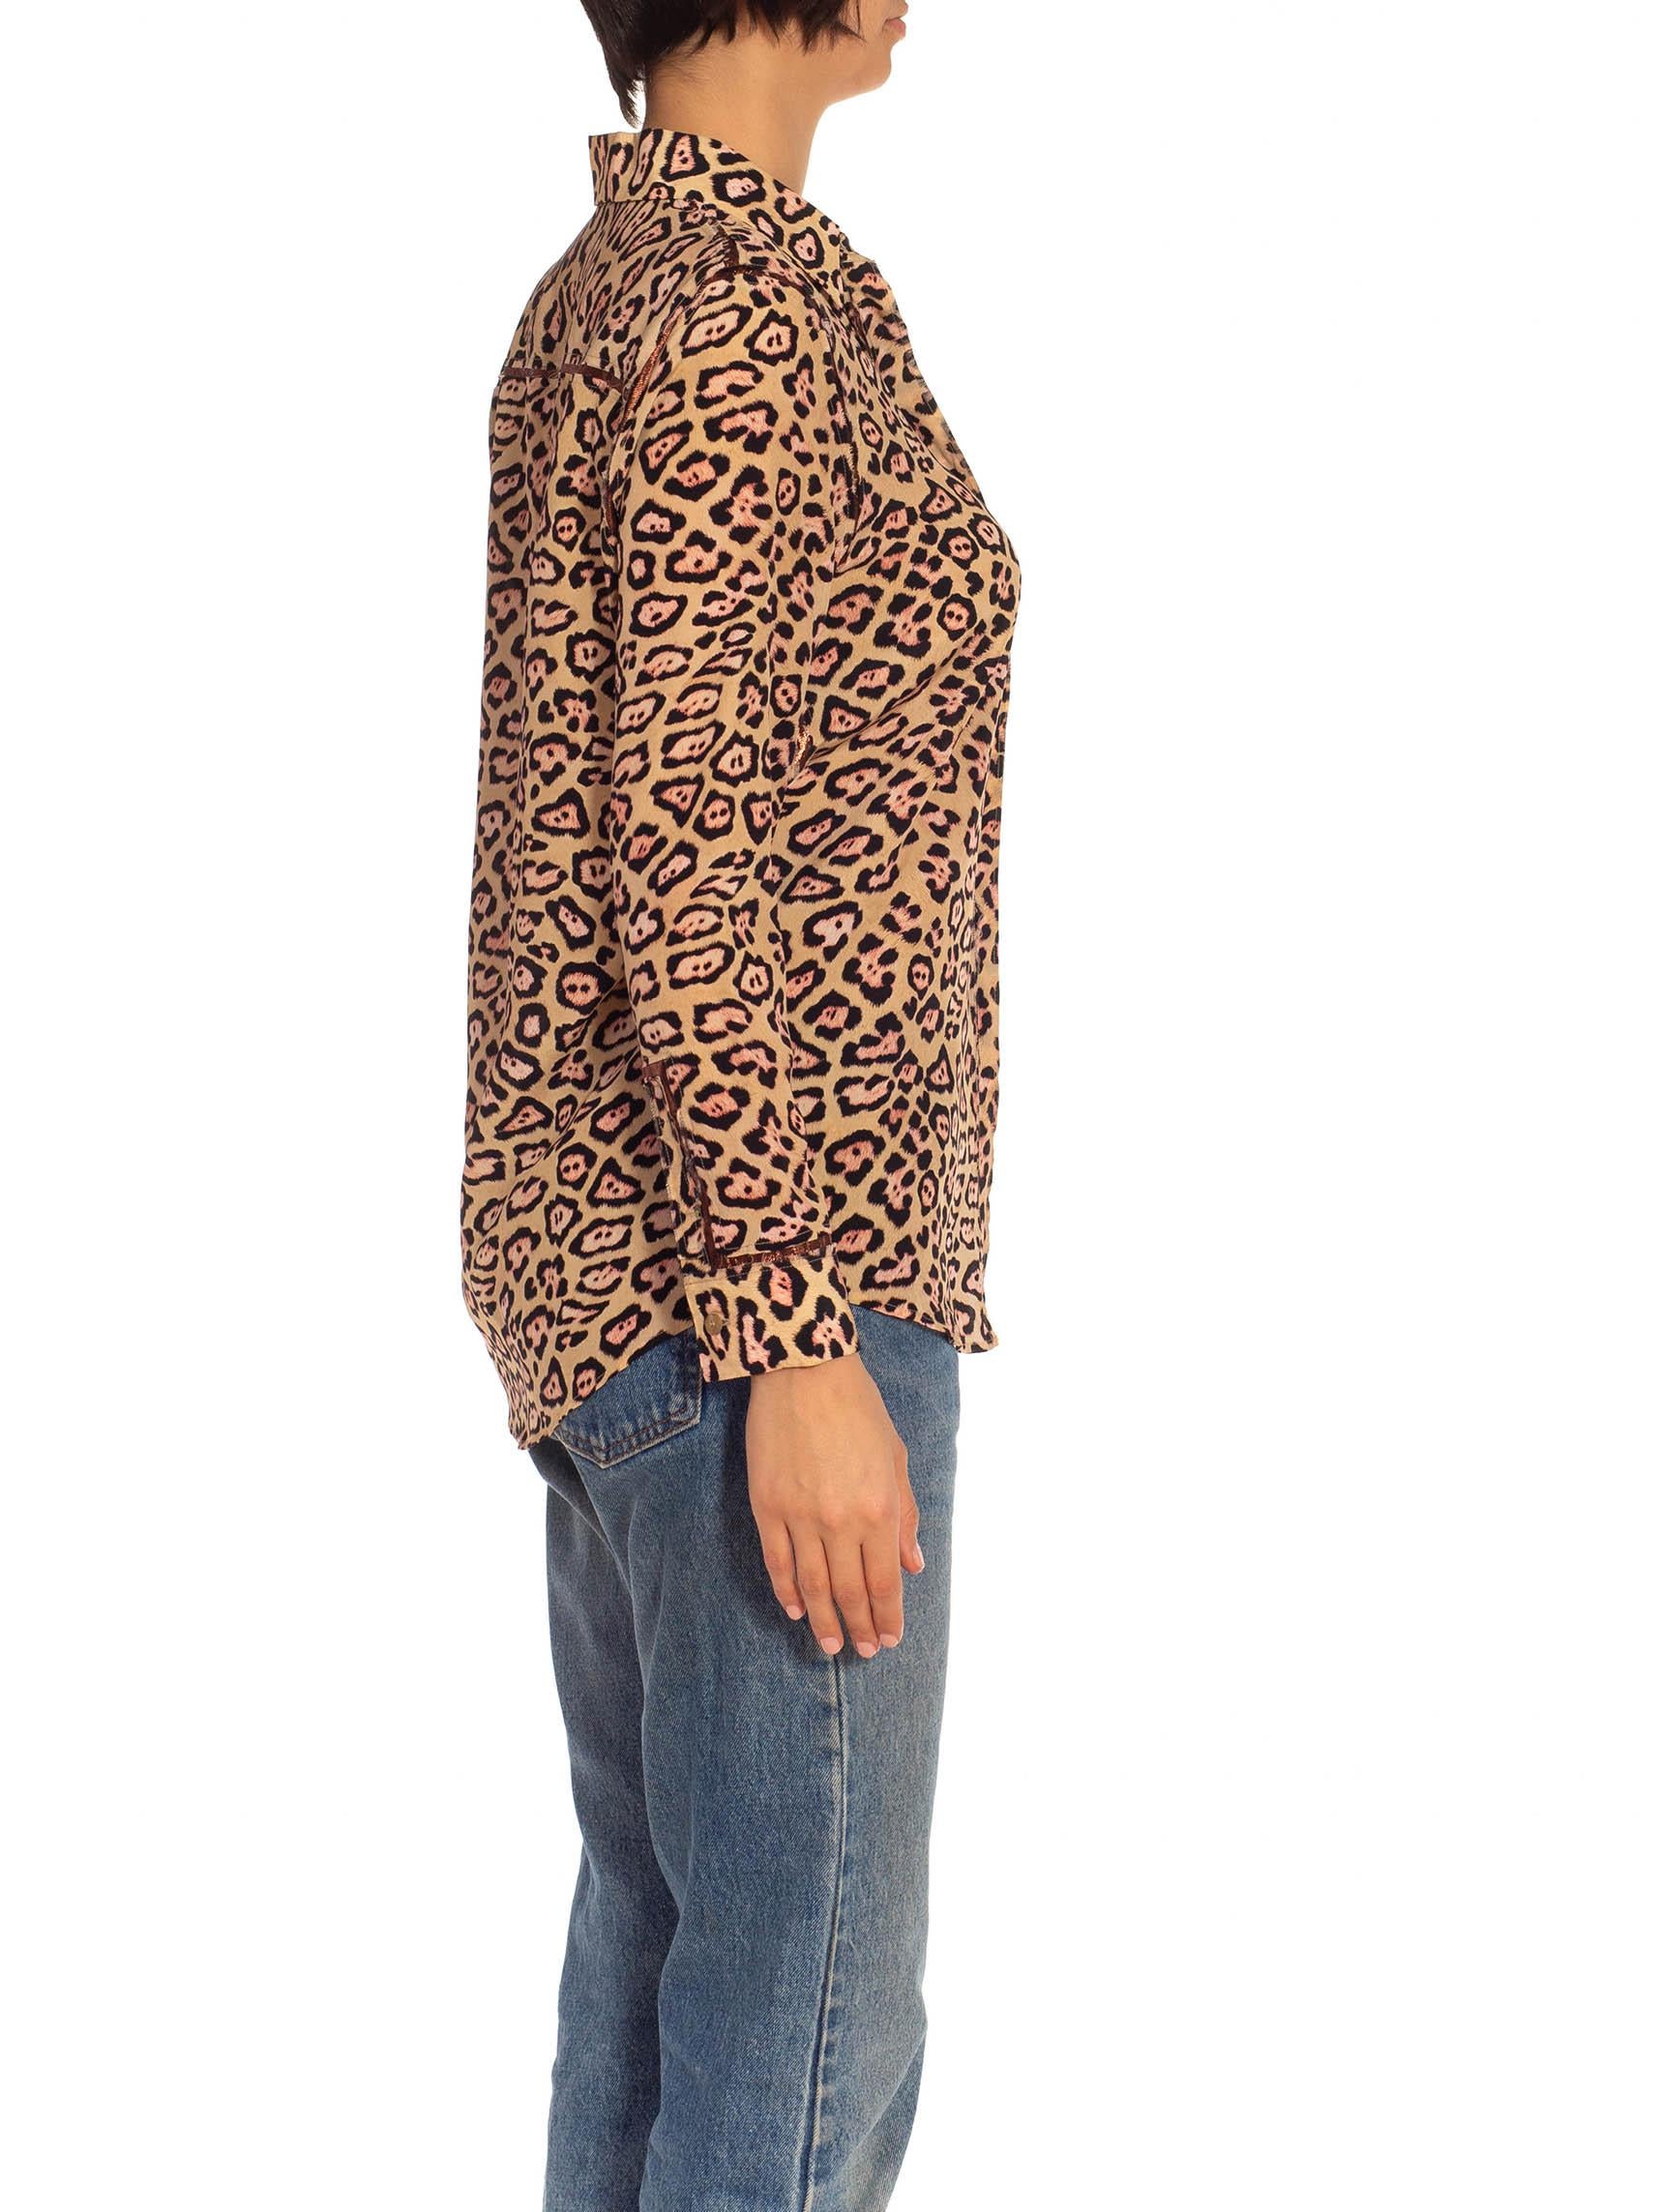 Women's 2010S GIVENCHY Leopard Print Tan & Brown Silk With Metallic Trimmings Shirt For Sale